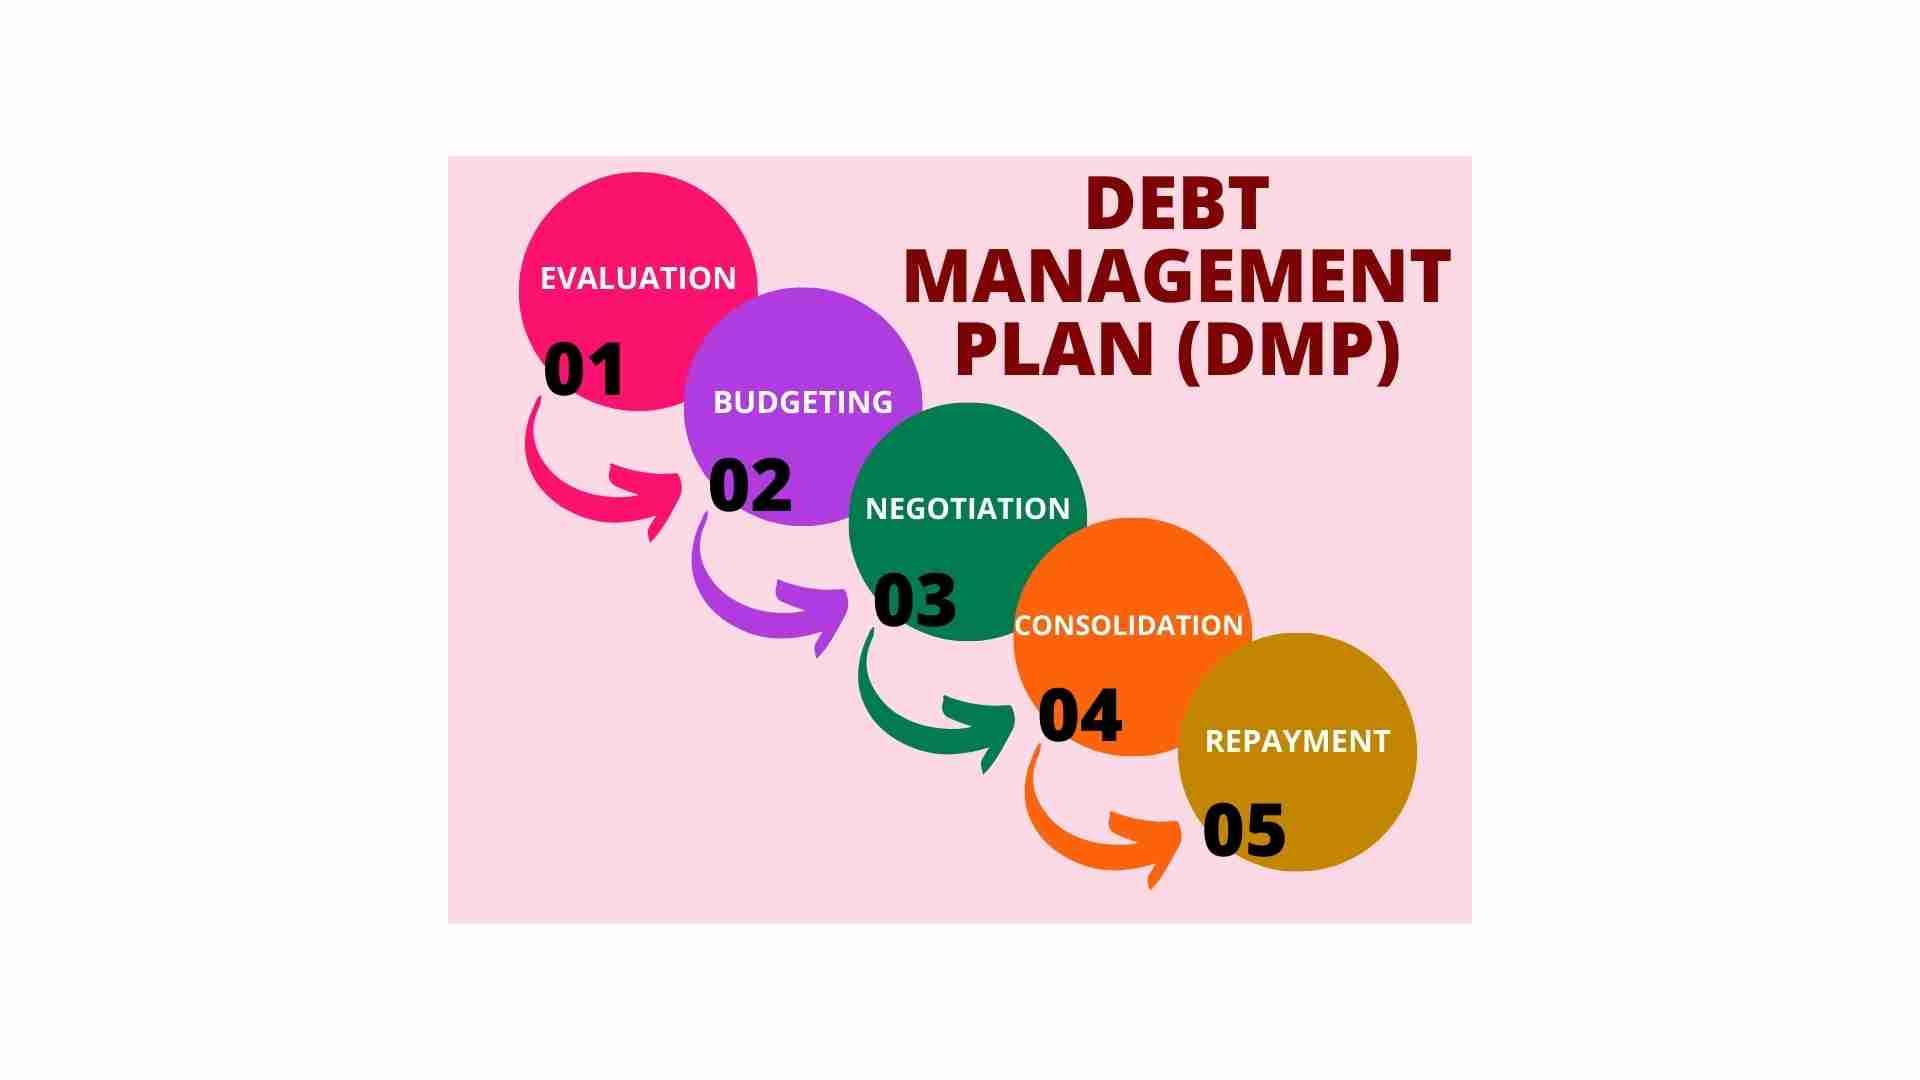 Colorful infographic illustrating a five-step debt management plan (DMP) with steps labeled: Evaluation, Weigh Options Carefully, Negotiation, Consolidation, and Repayment.